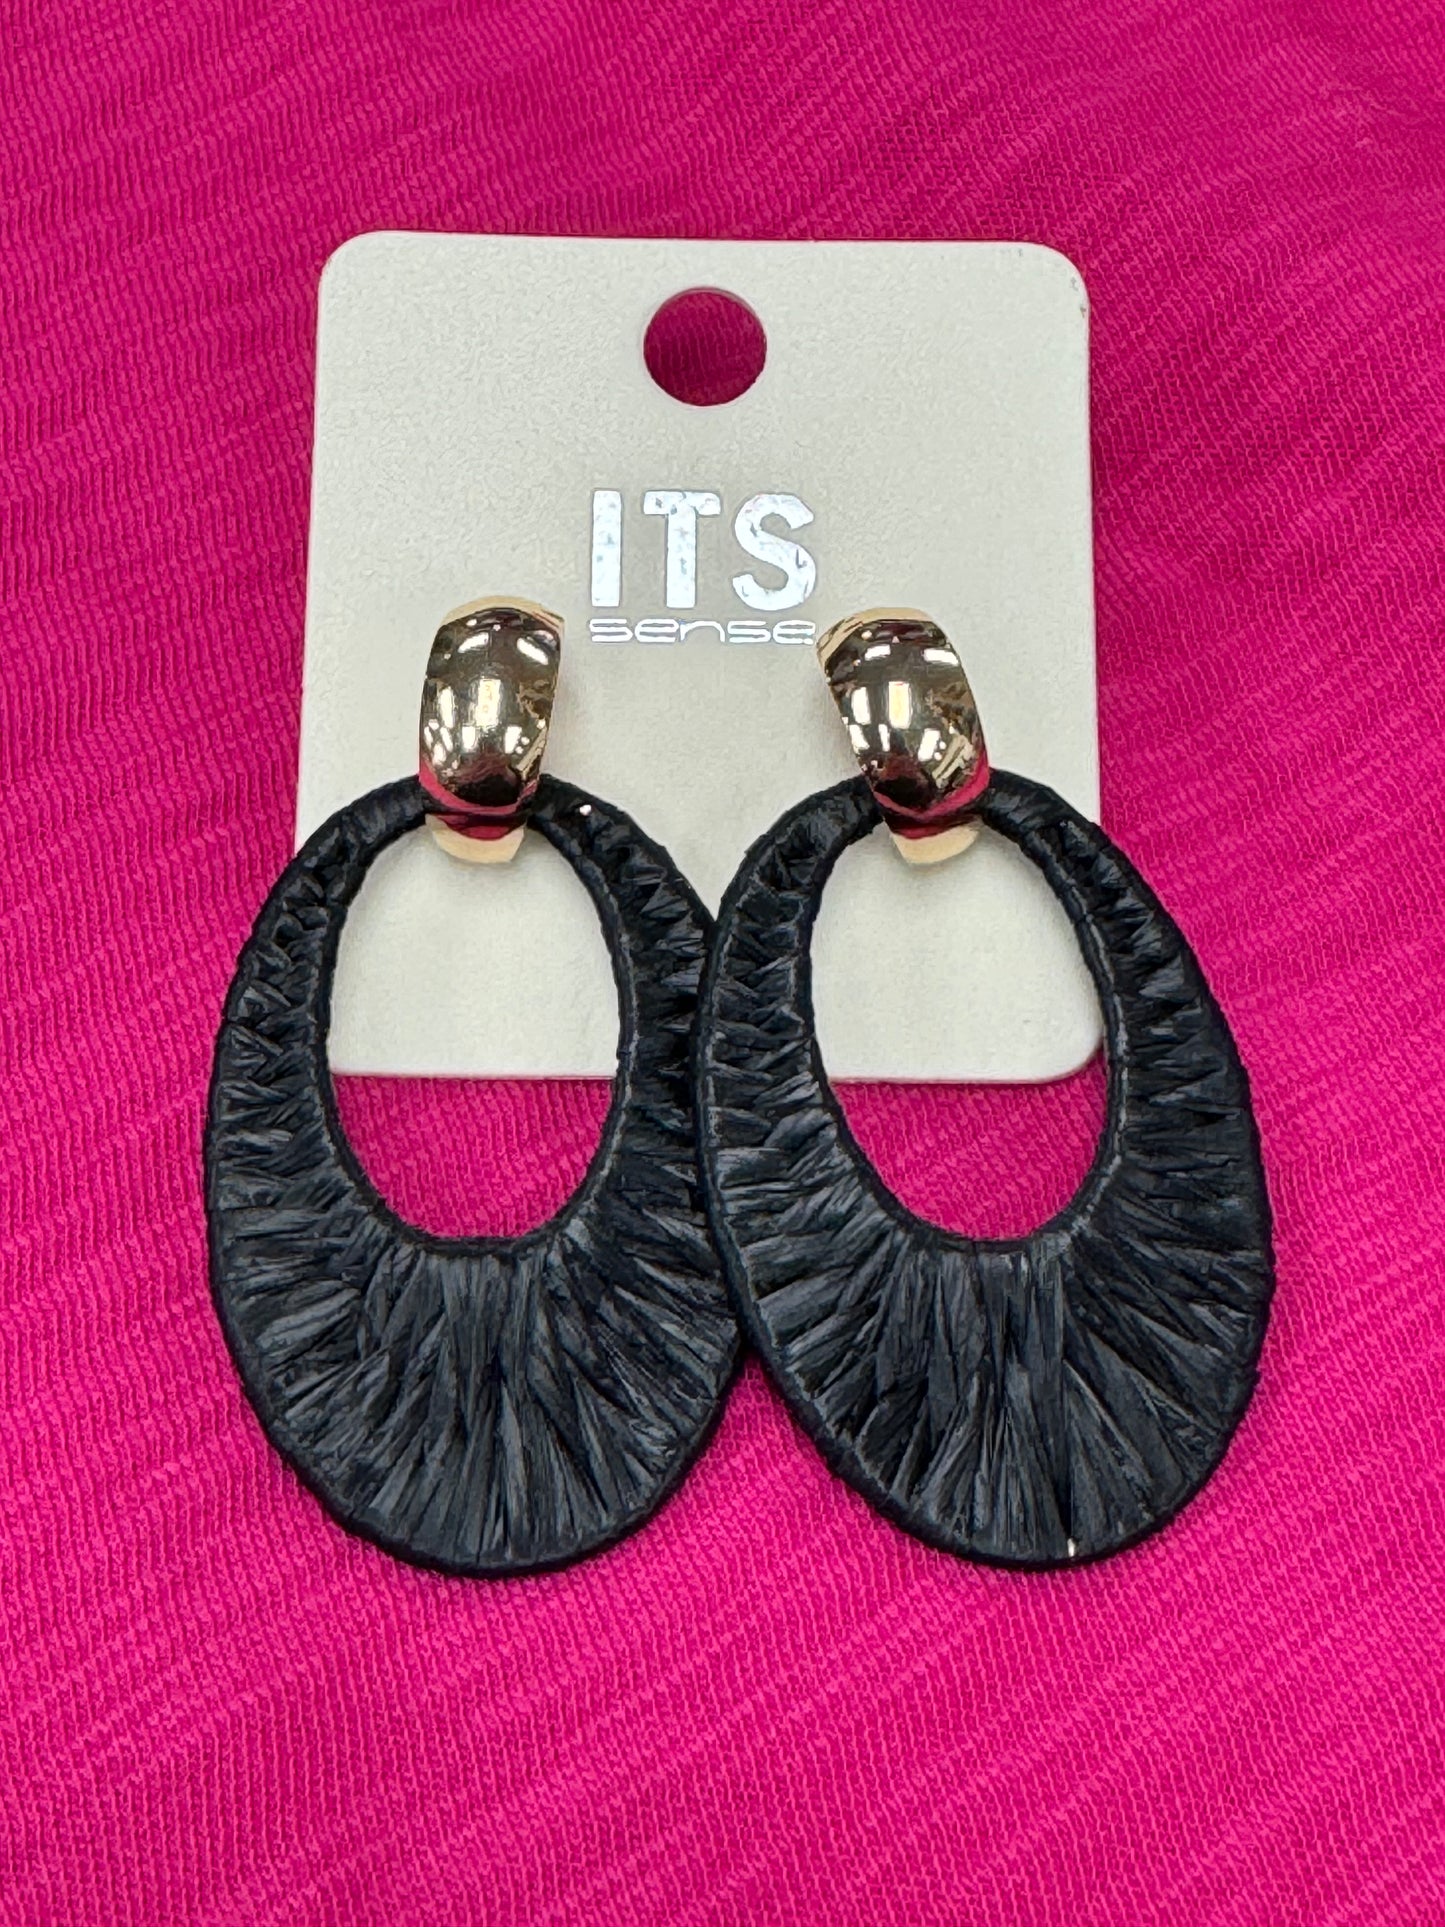 Black and Gold Post Earrings